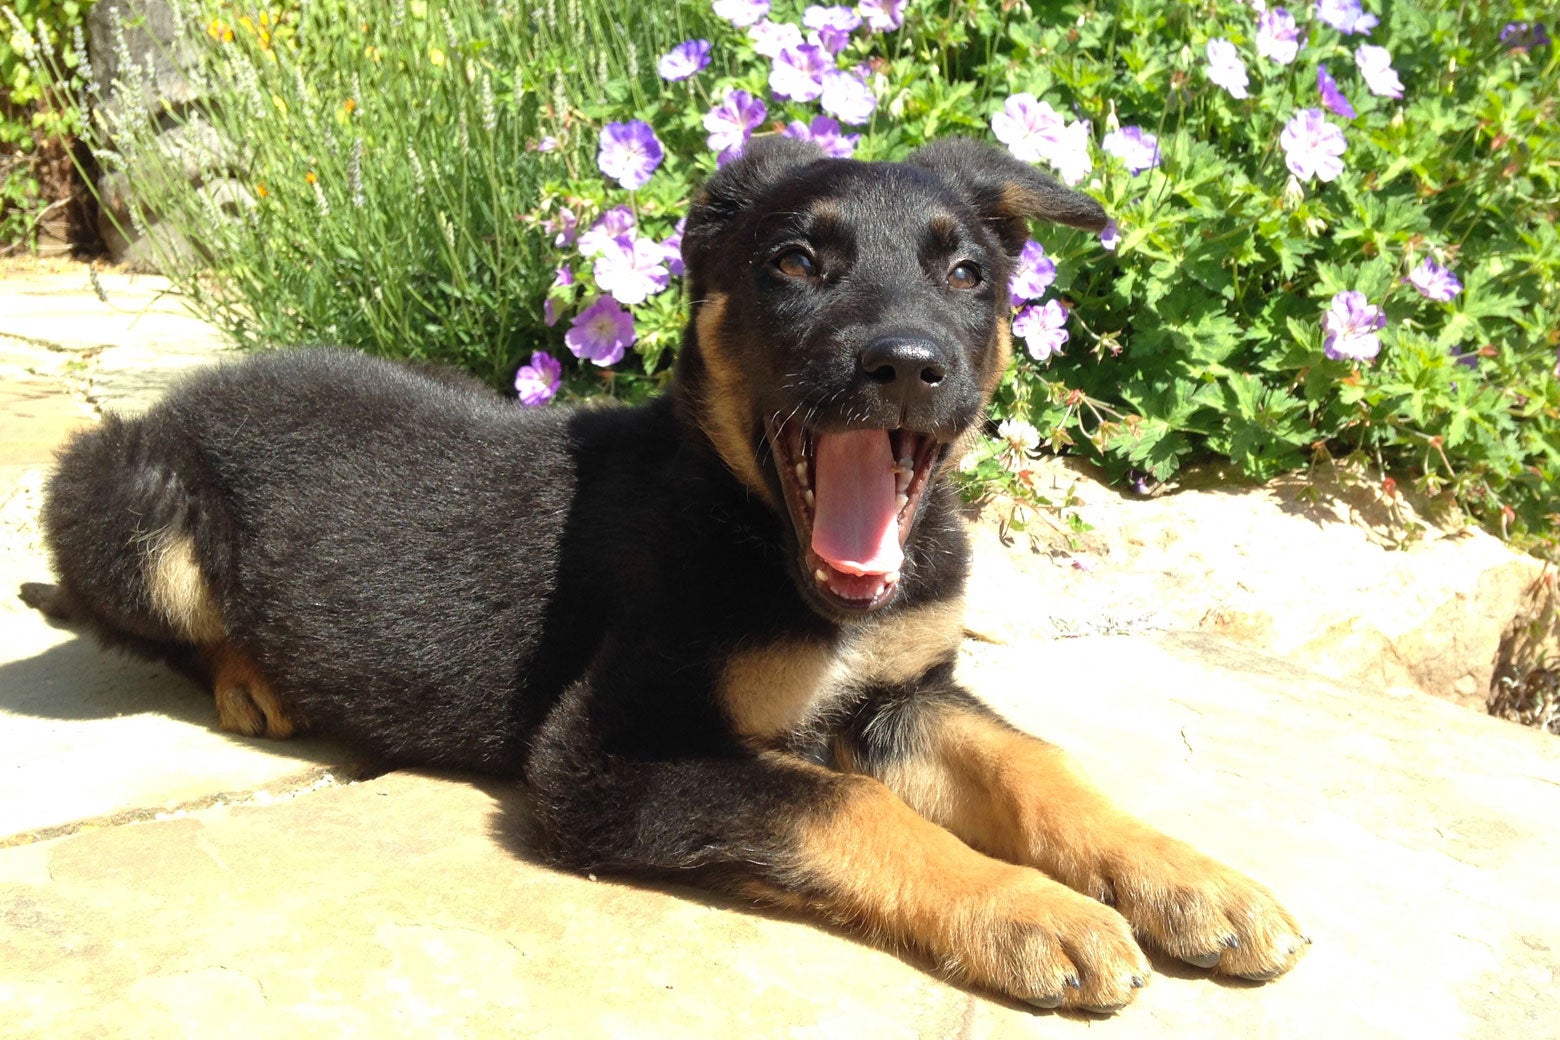 Ruby, the author's dog, as a puppy.